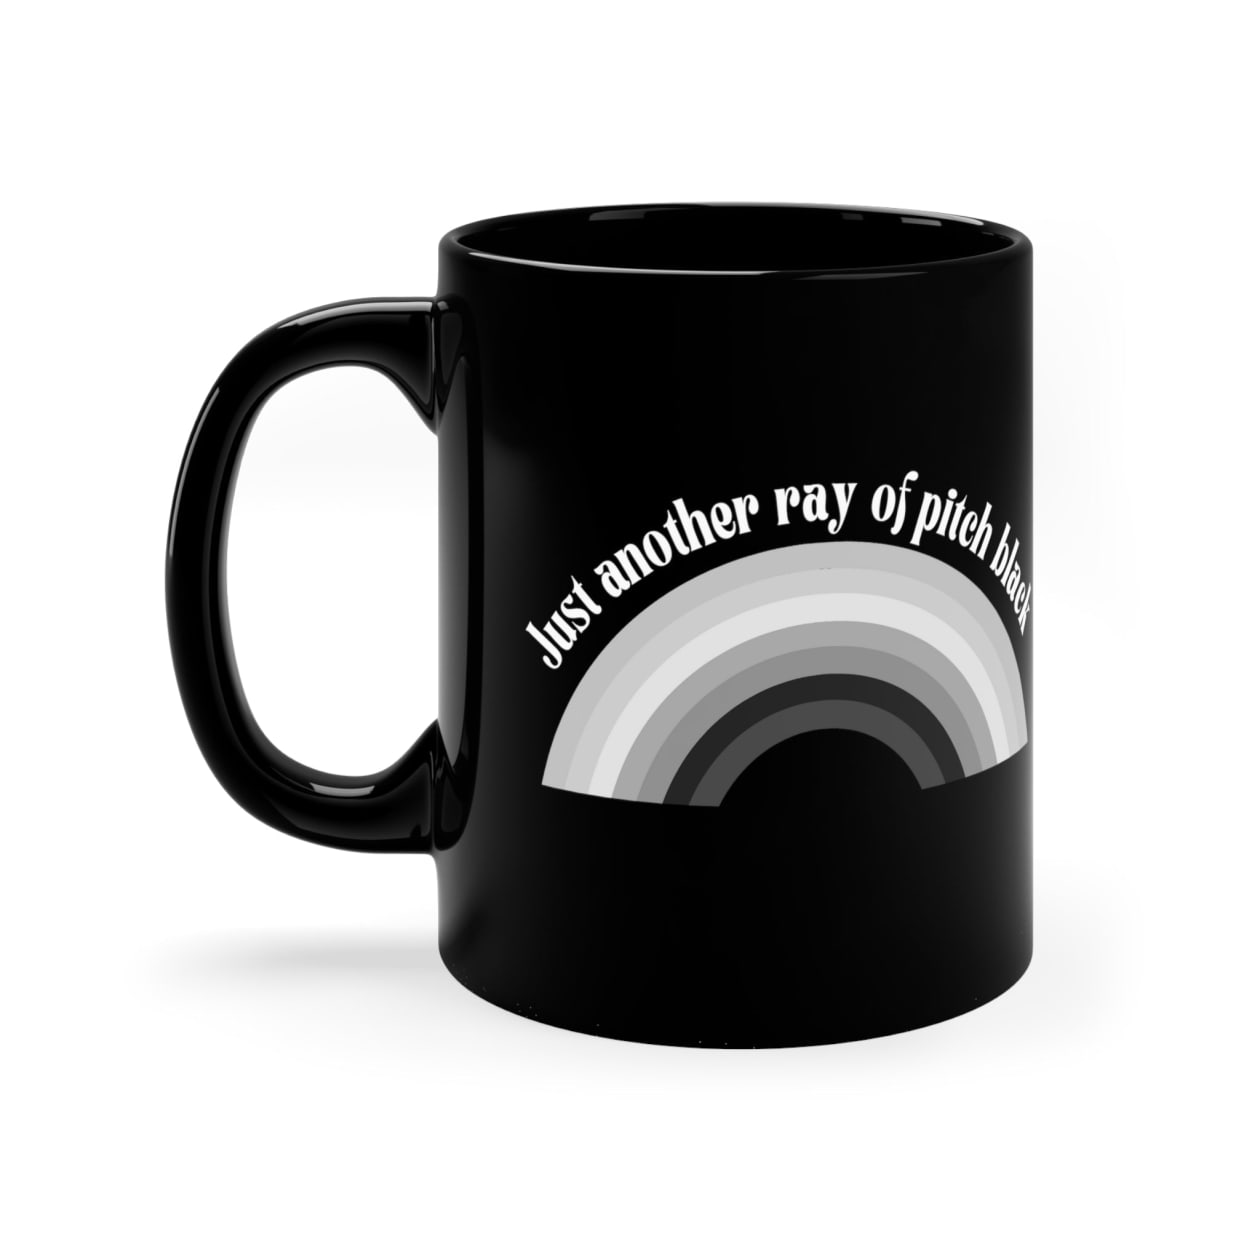 Just Another Ray of Pitch Black 11oz Black Mug - Size: 11oz